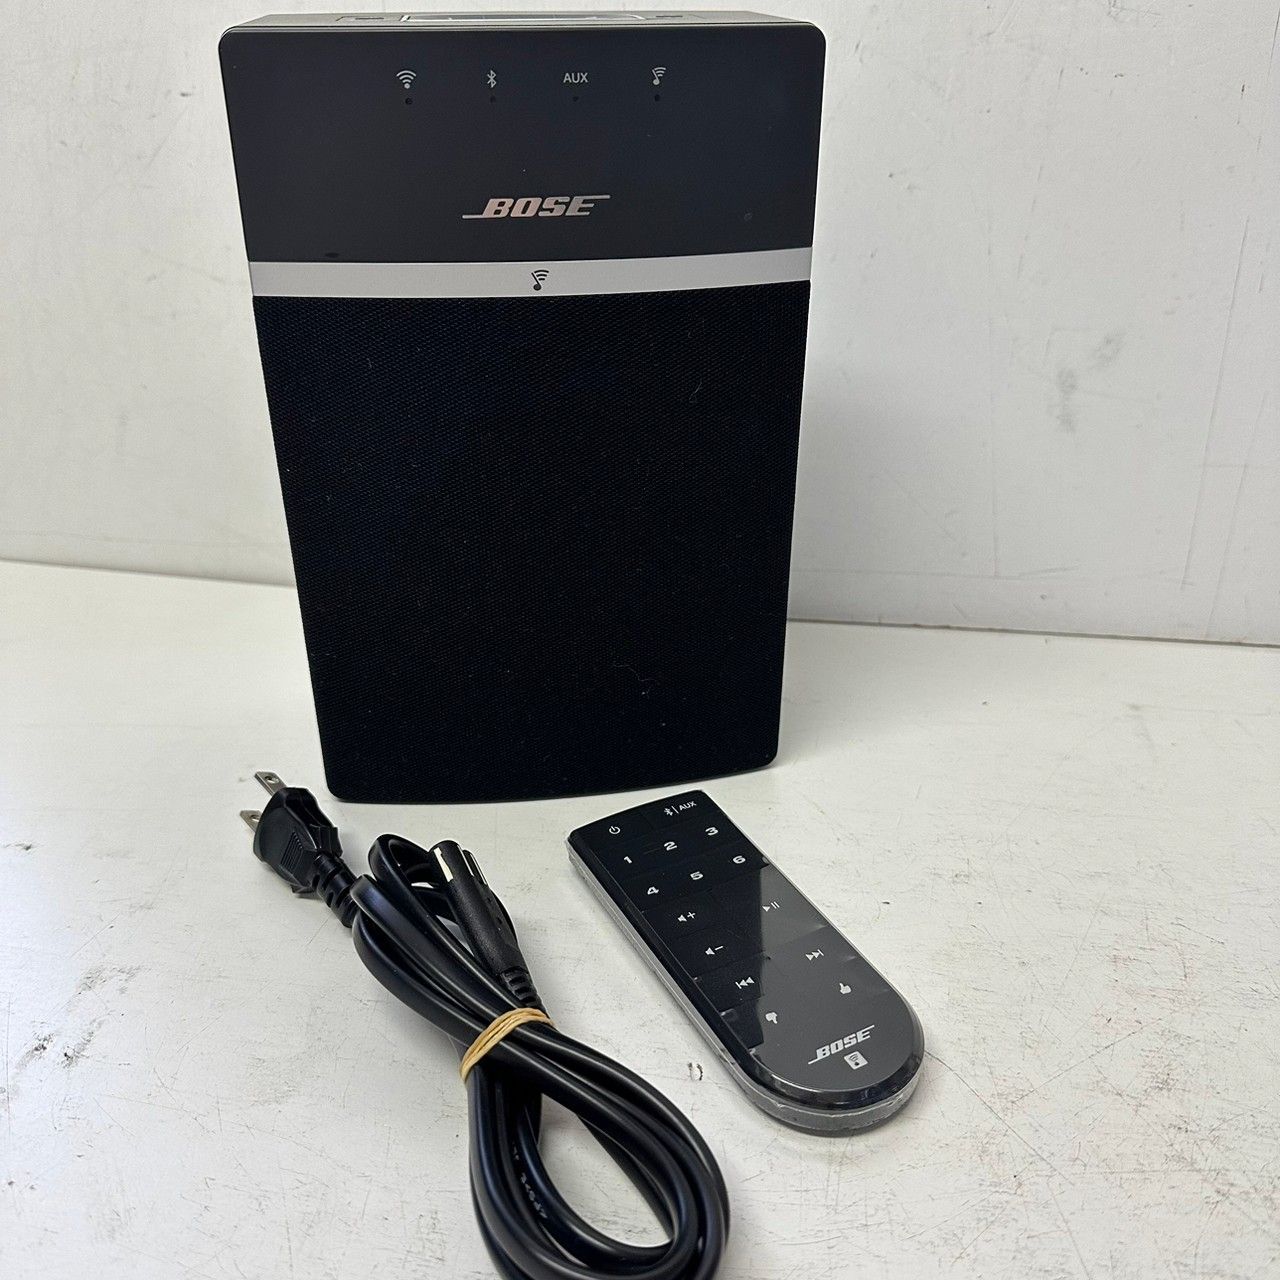 BOSE 416776 SoundTouch 10 ワイヤレス スピーカー - オーディオ機器